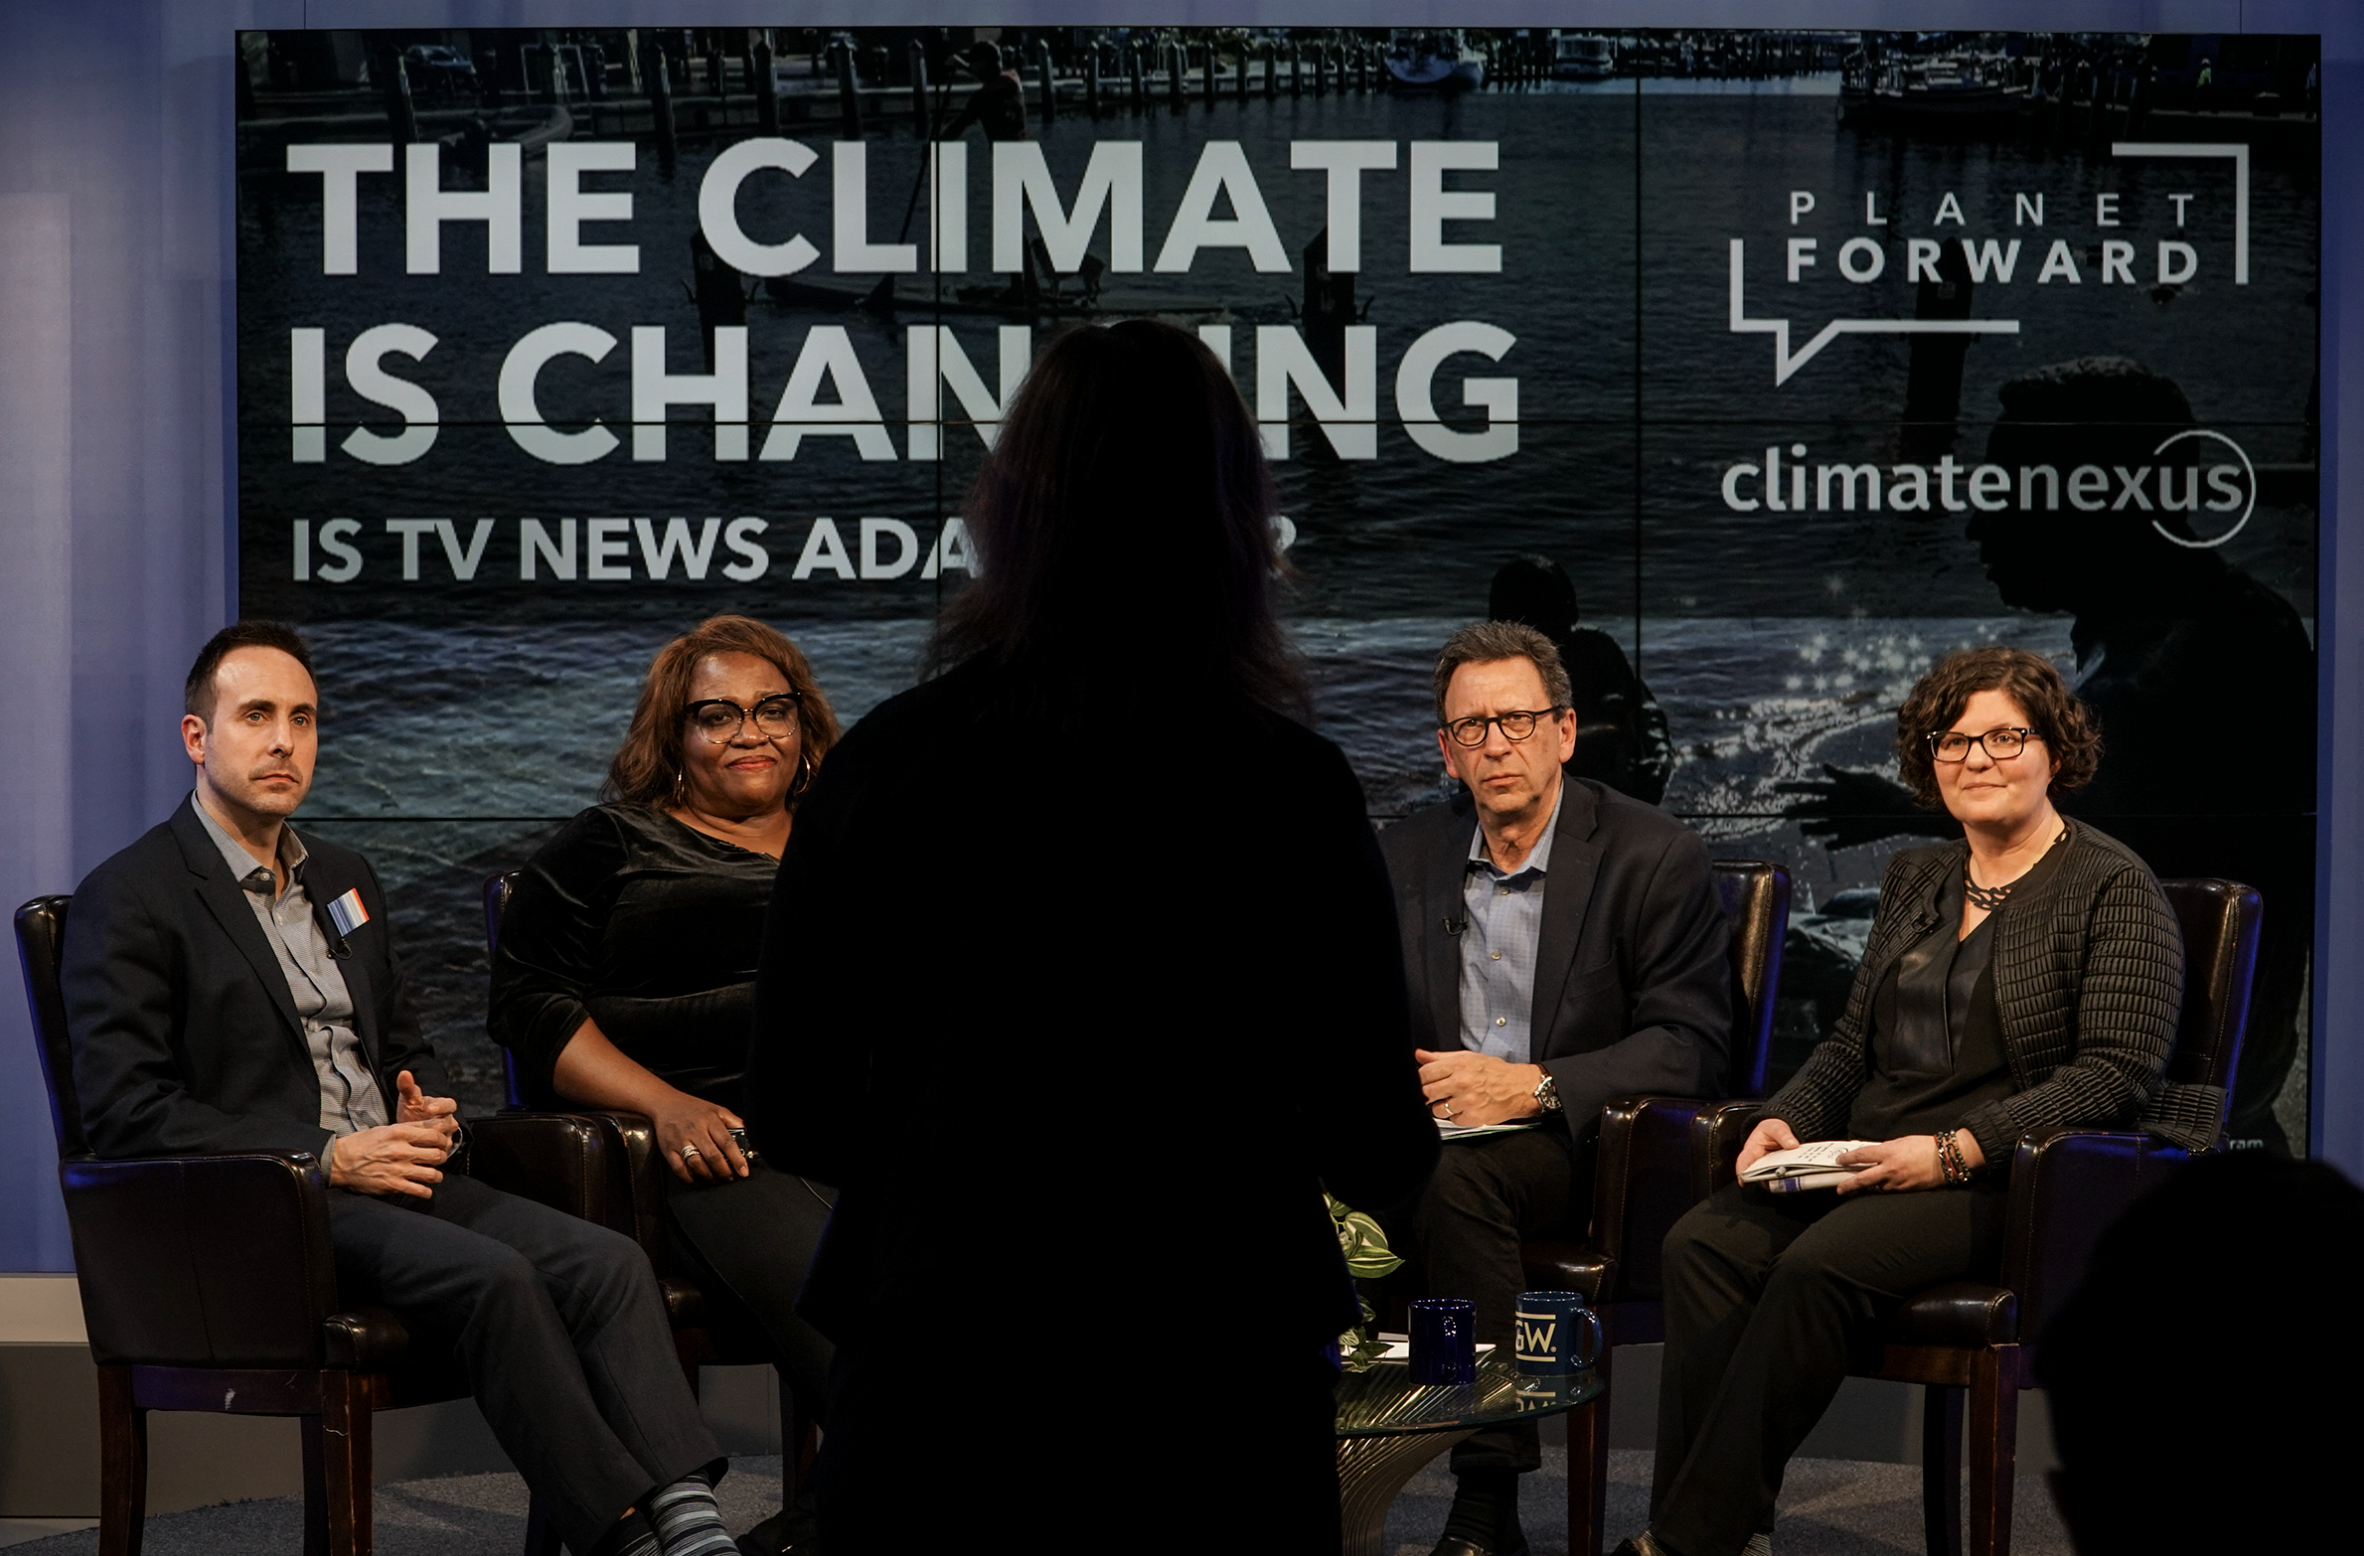 Five takeaways for journalists to take on climate